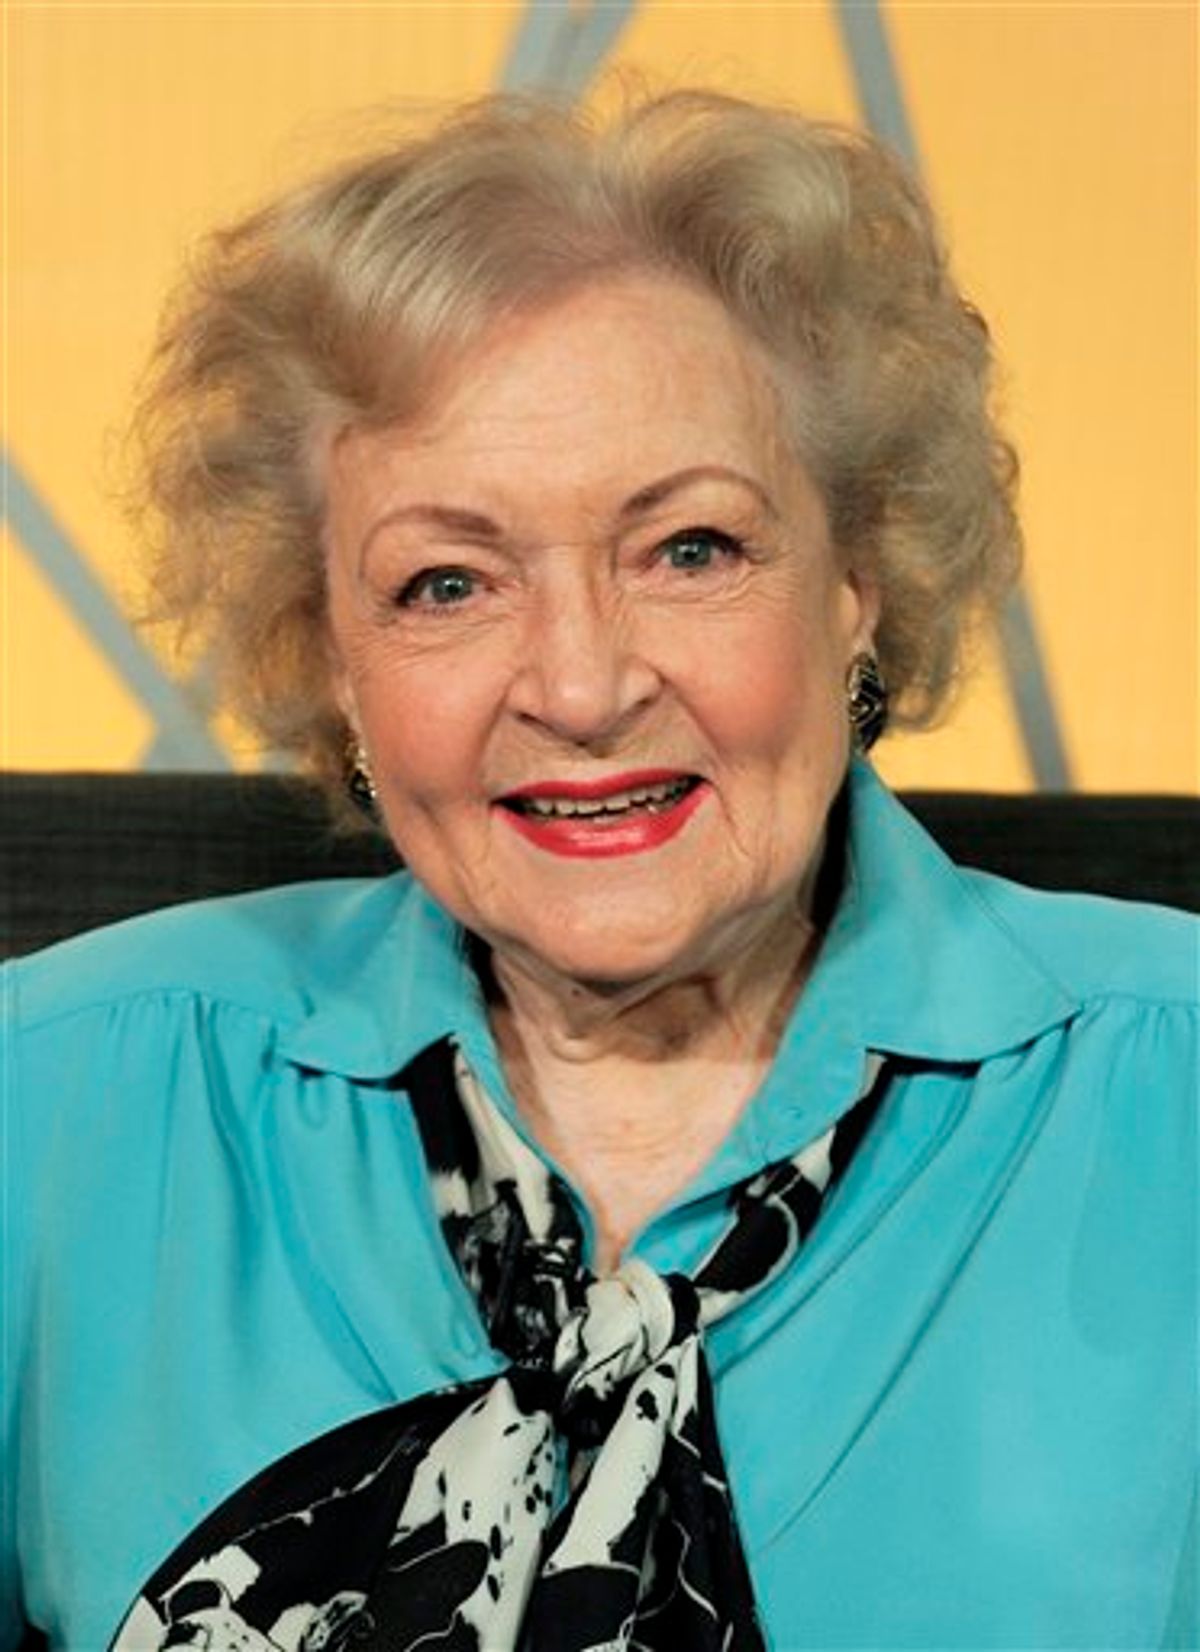 FILE - In this Nov. 29, 2009 file photo, actress Betty White poses for a portrait in Burbank, Calif. (AP Photo/Chris Pizzello, file) (AP)